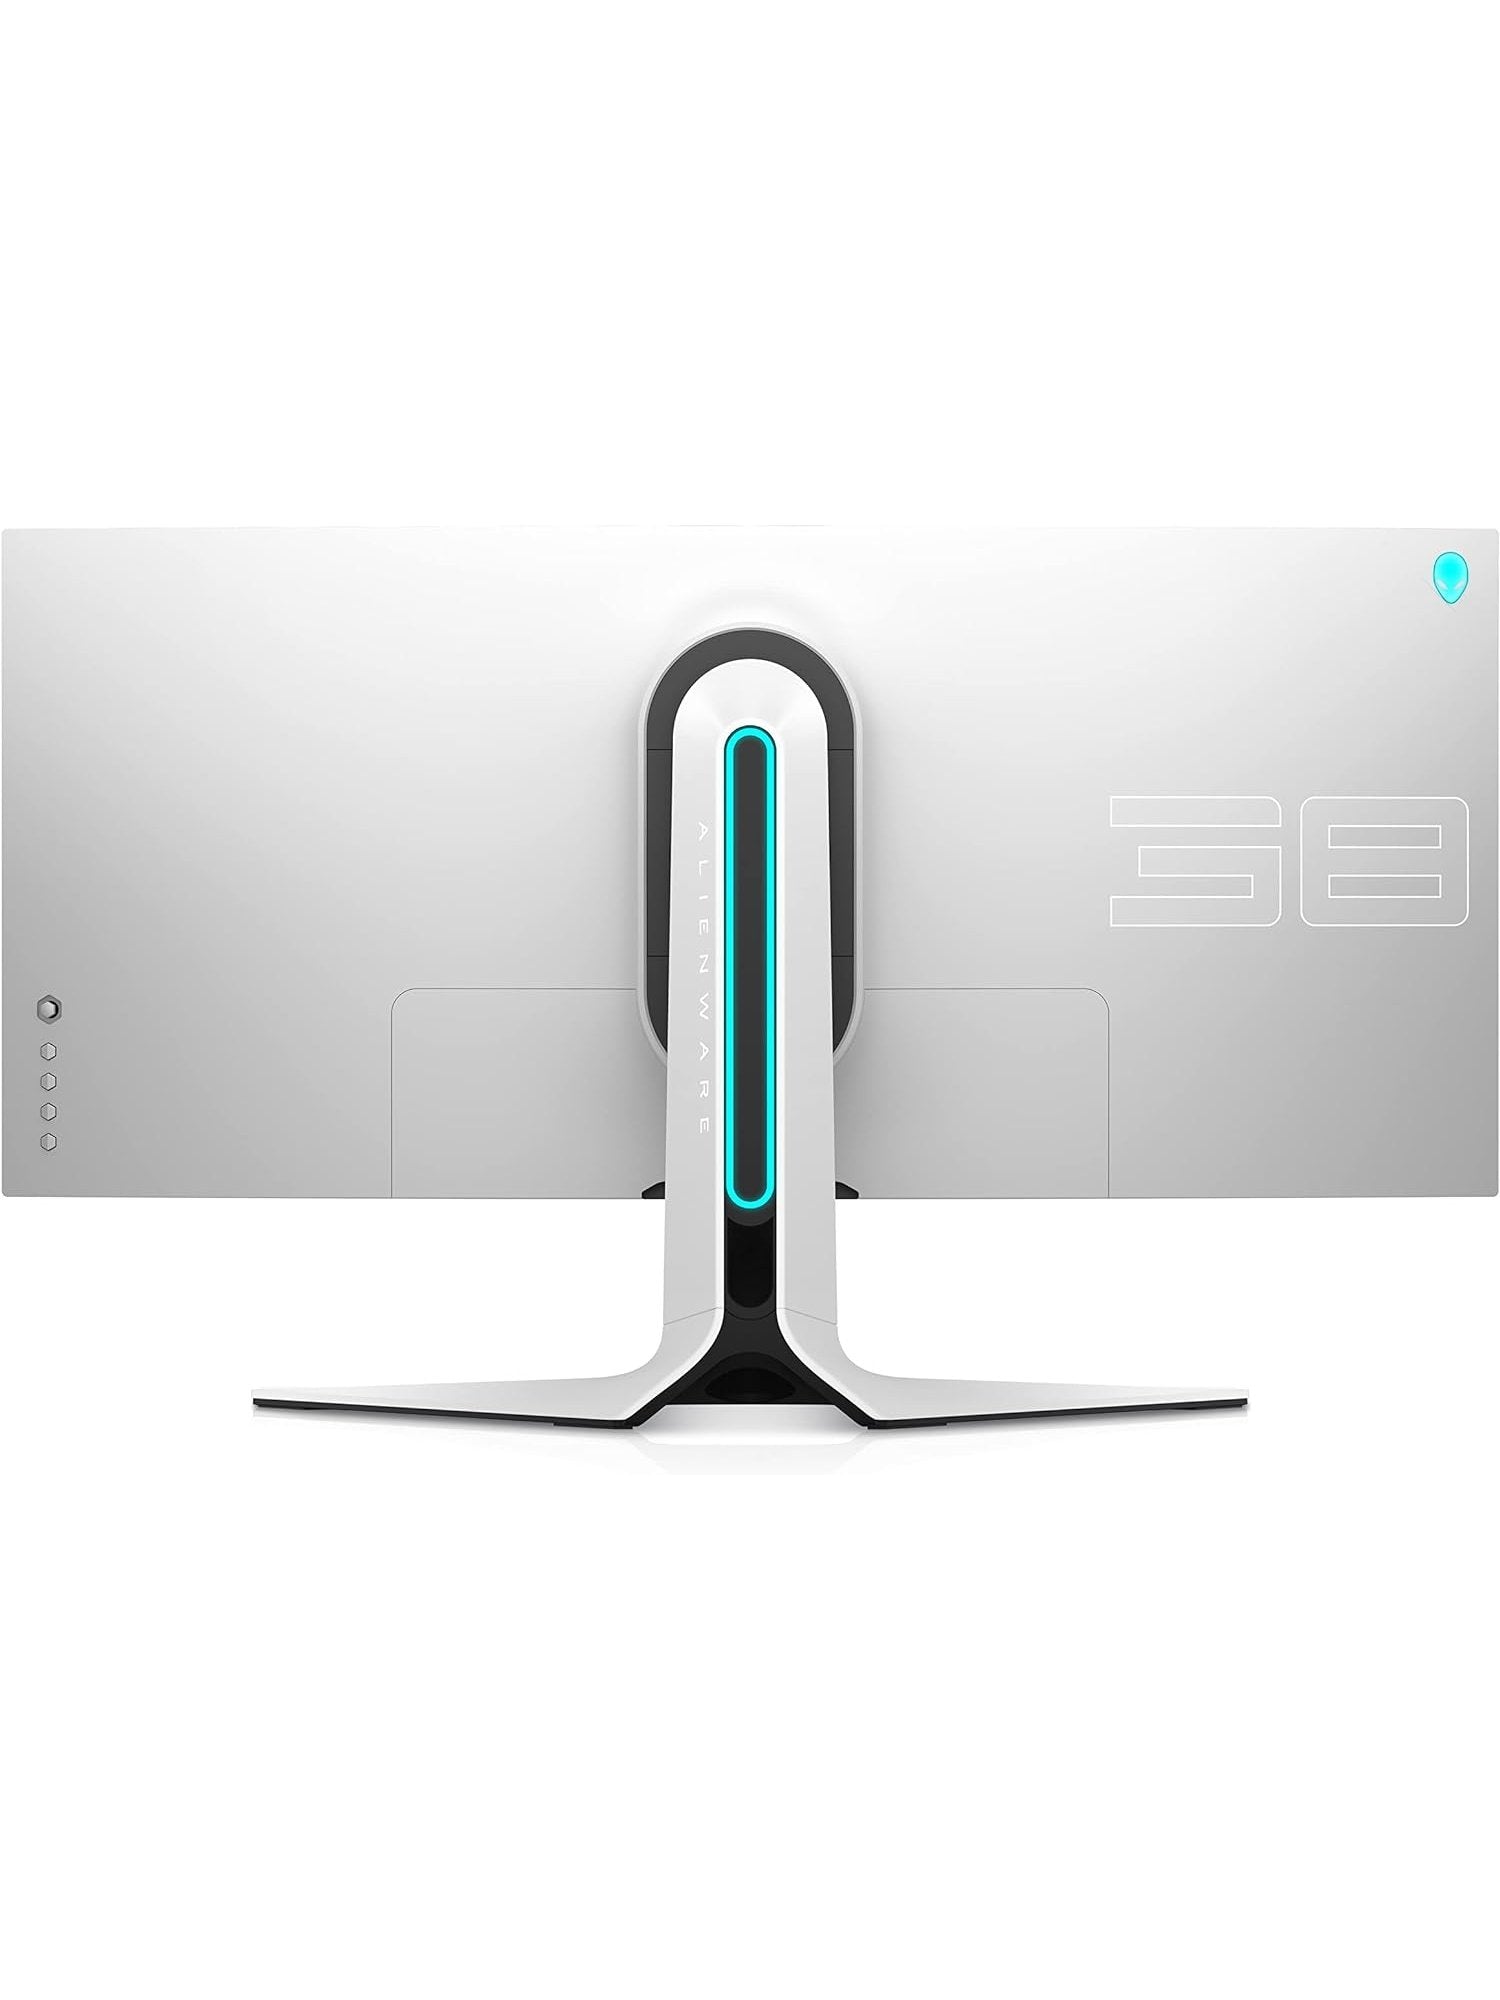 Alienware Ultrawide Curved Gaming Monitor 38 Inch, 144Hz Refresh Rate, 3840 x 1600 WQHD , IPS, NVIDIA G-SYNC Ultimate, 1ms Response Time, 2300R Curvature, VESA Display HDR 600, AW3821DW - White